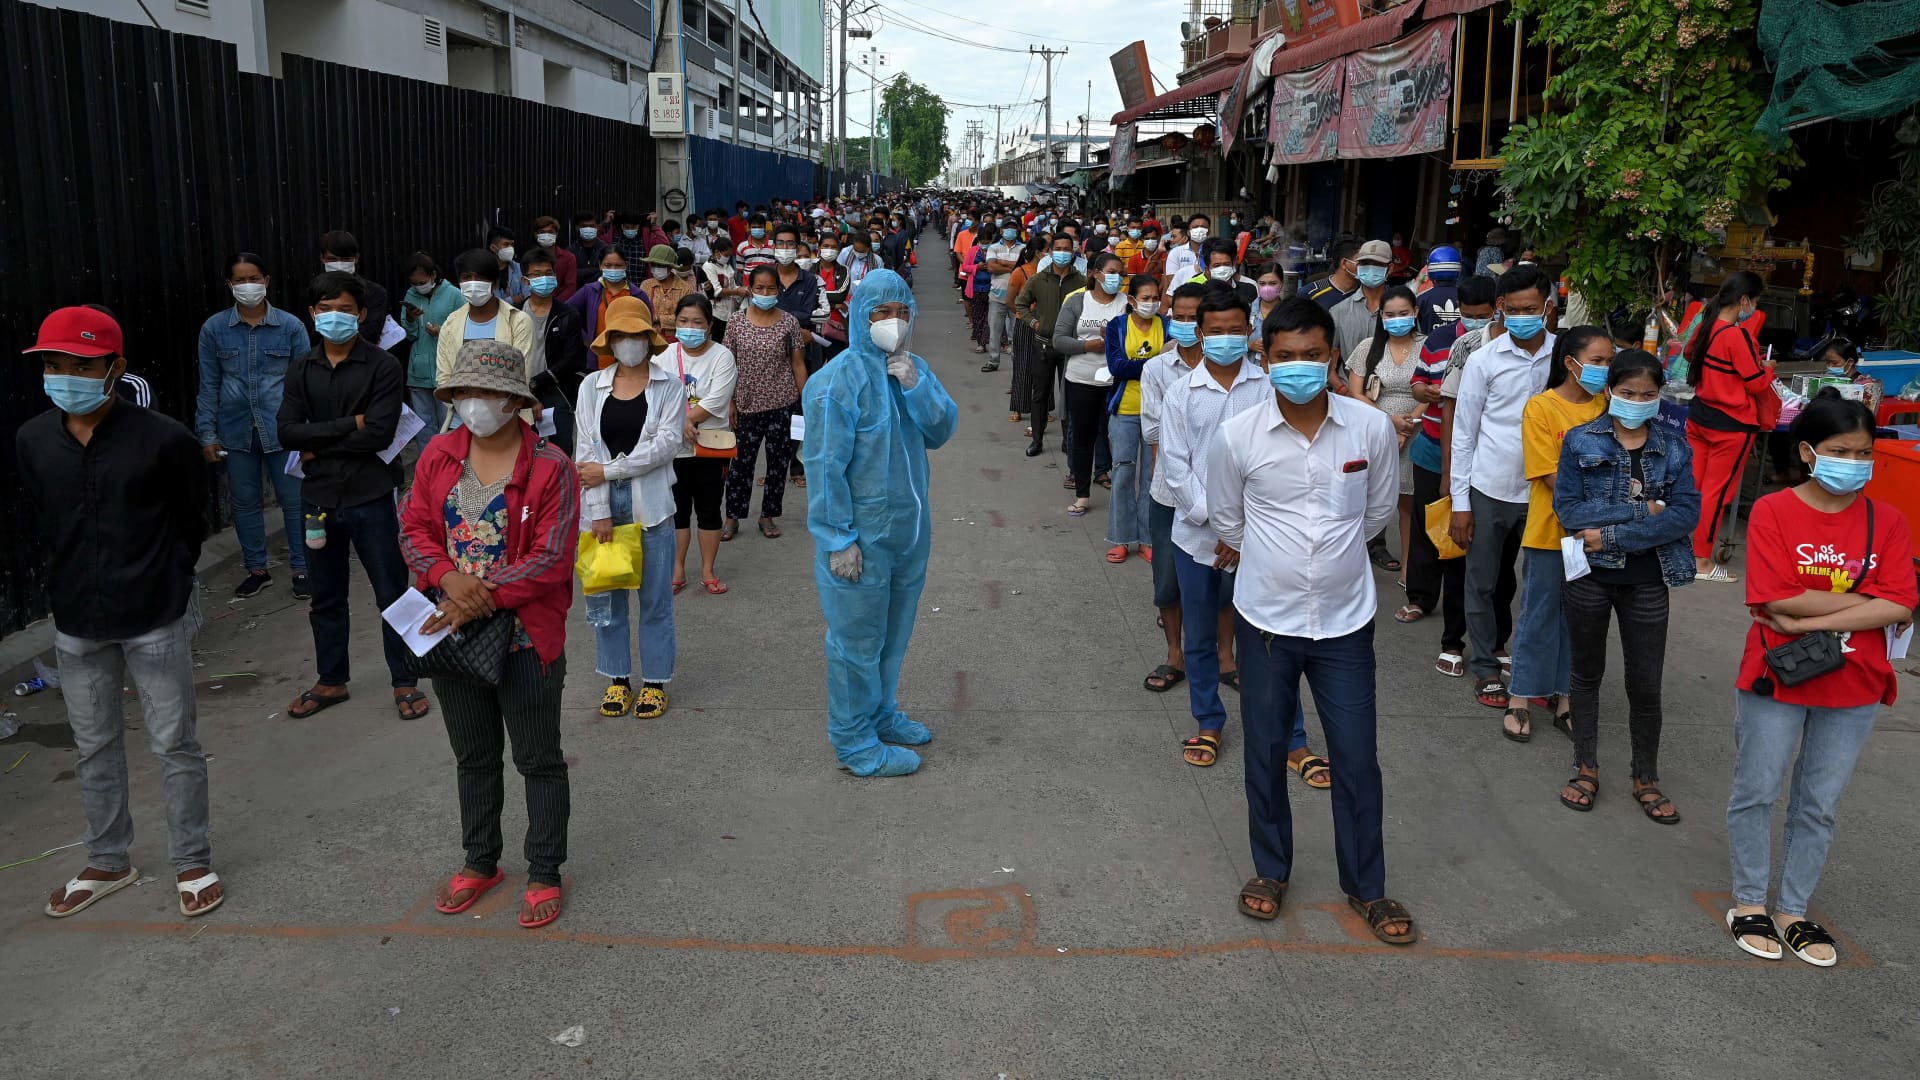 An official in personal protective equipment (PPE) manages the crowd as people queue to receive China's Sinopharm Covid-19 coronavirus vaccine in Phnom Penh on May 31, 2021, as part of the government's campaign to halt the rising number of cases of the virus.